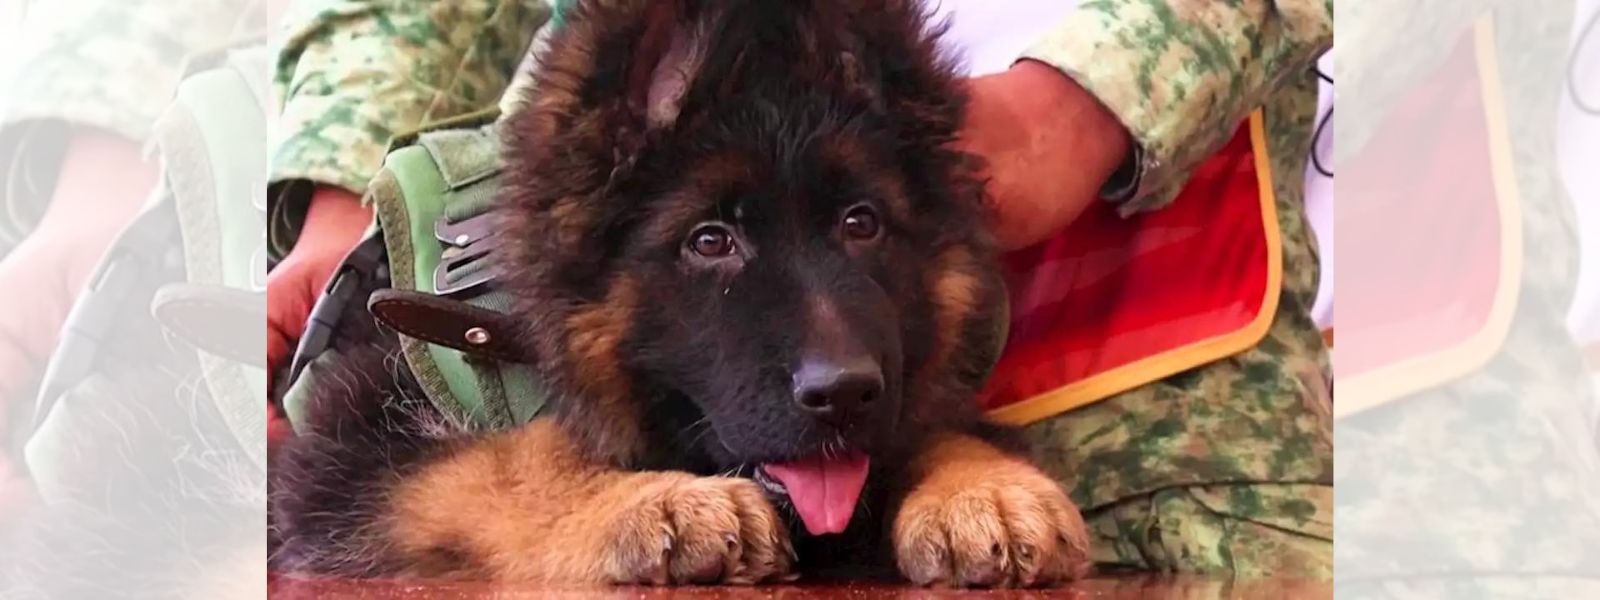 Turkiye gifts Mexico a puppy to honor rescue dog